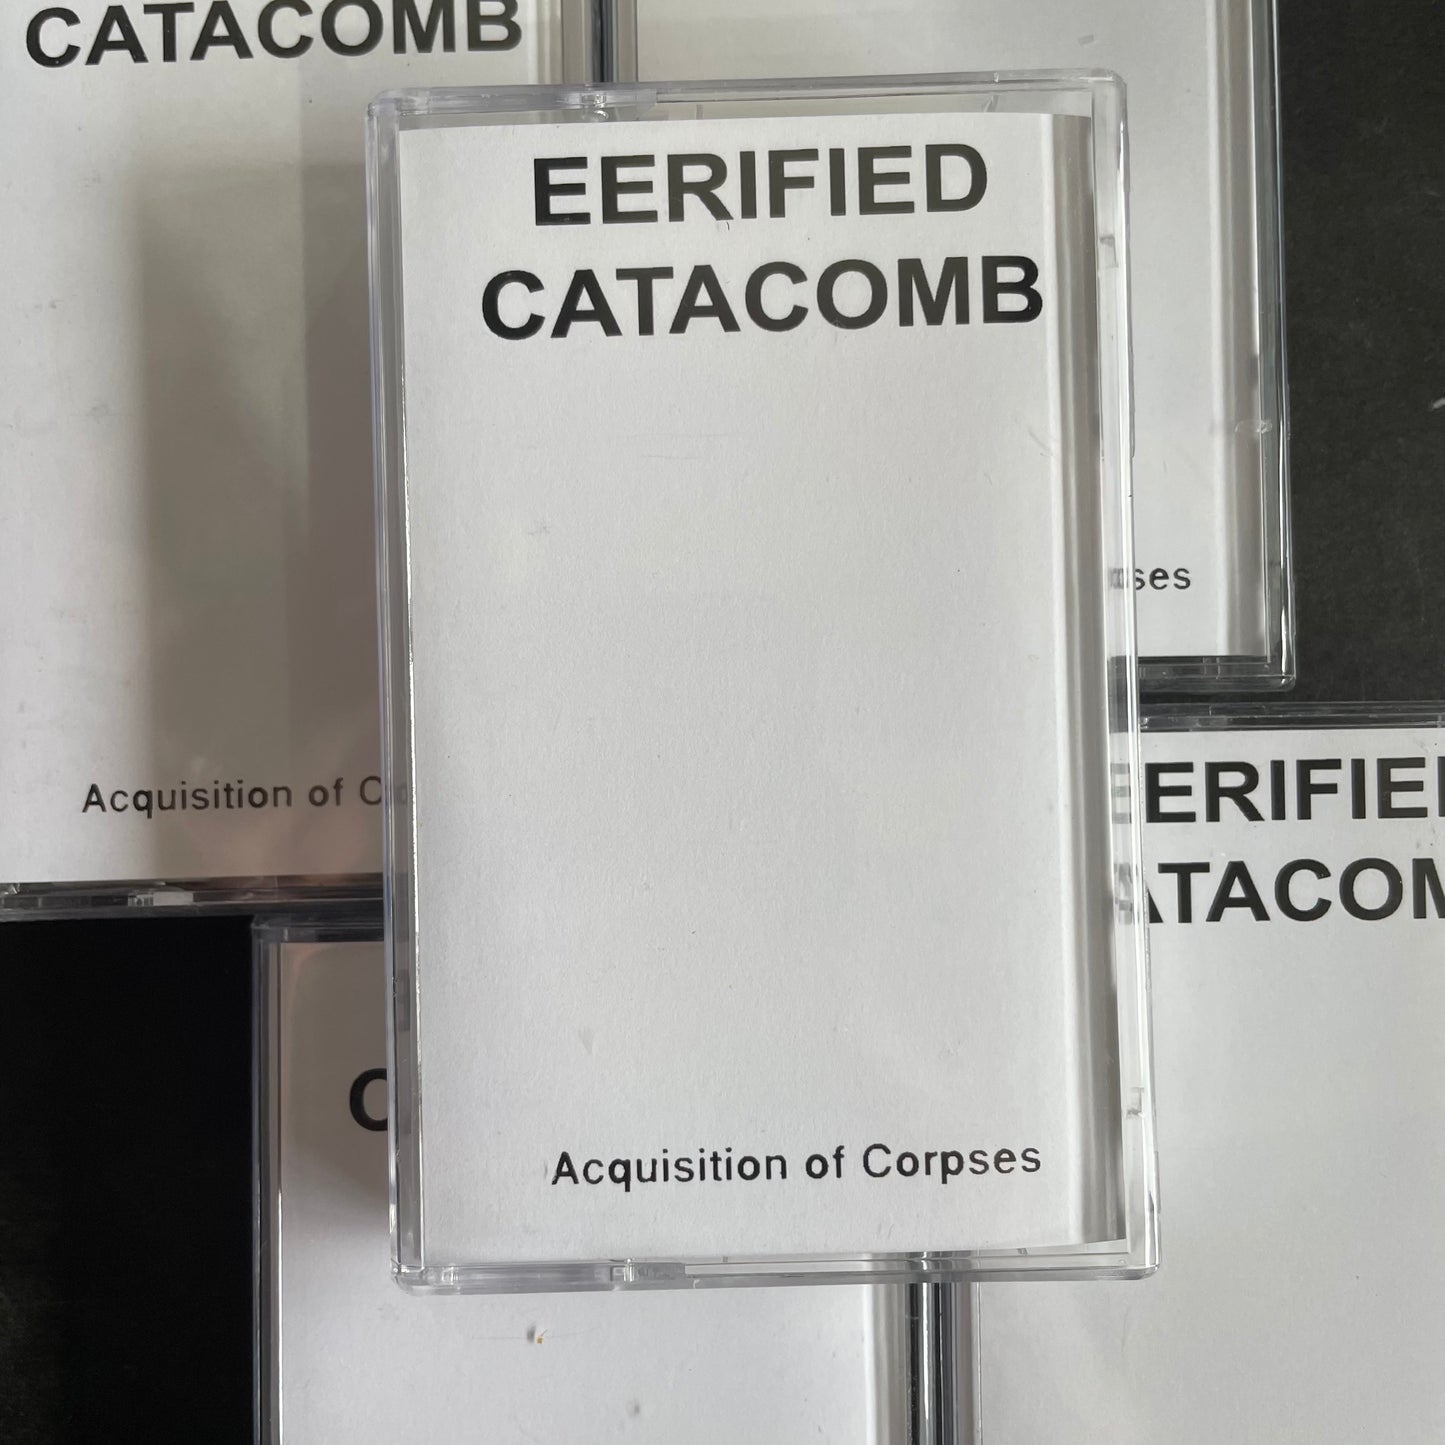 Eerified Catacomb - Acquisition of Corpses Pro Tape